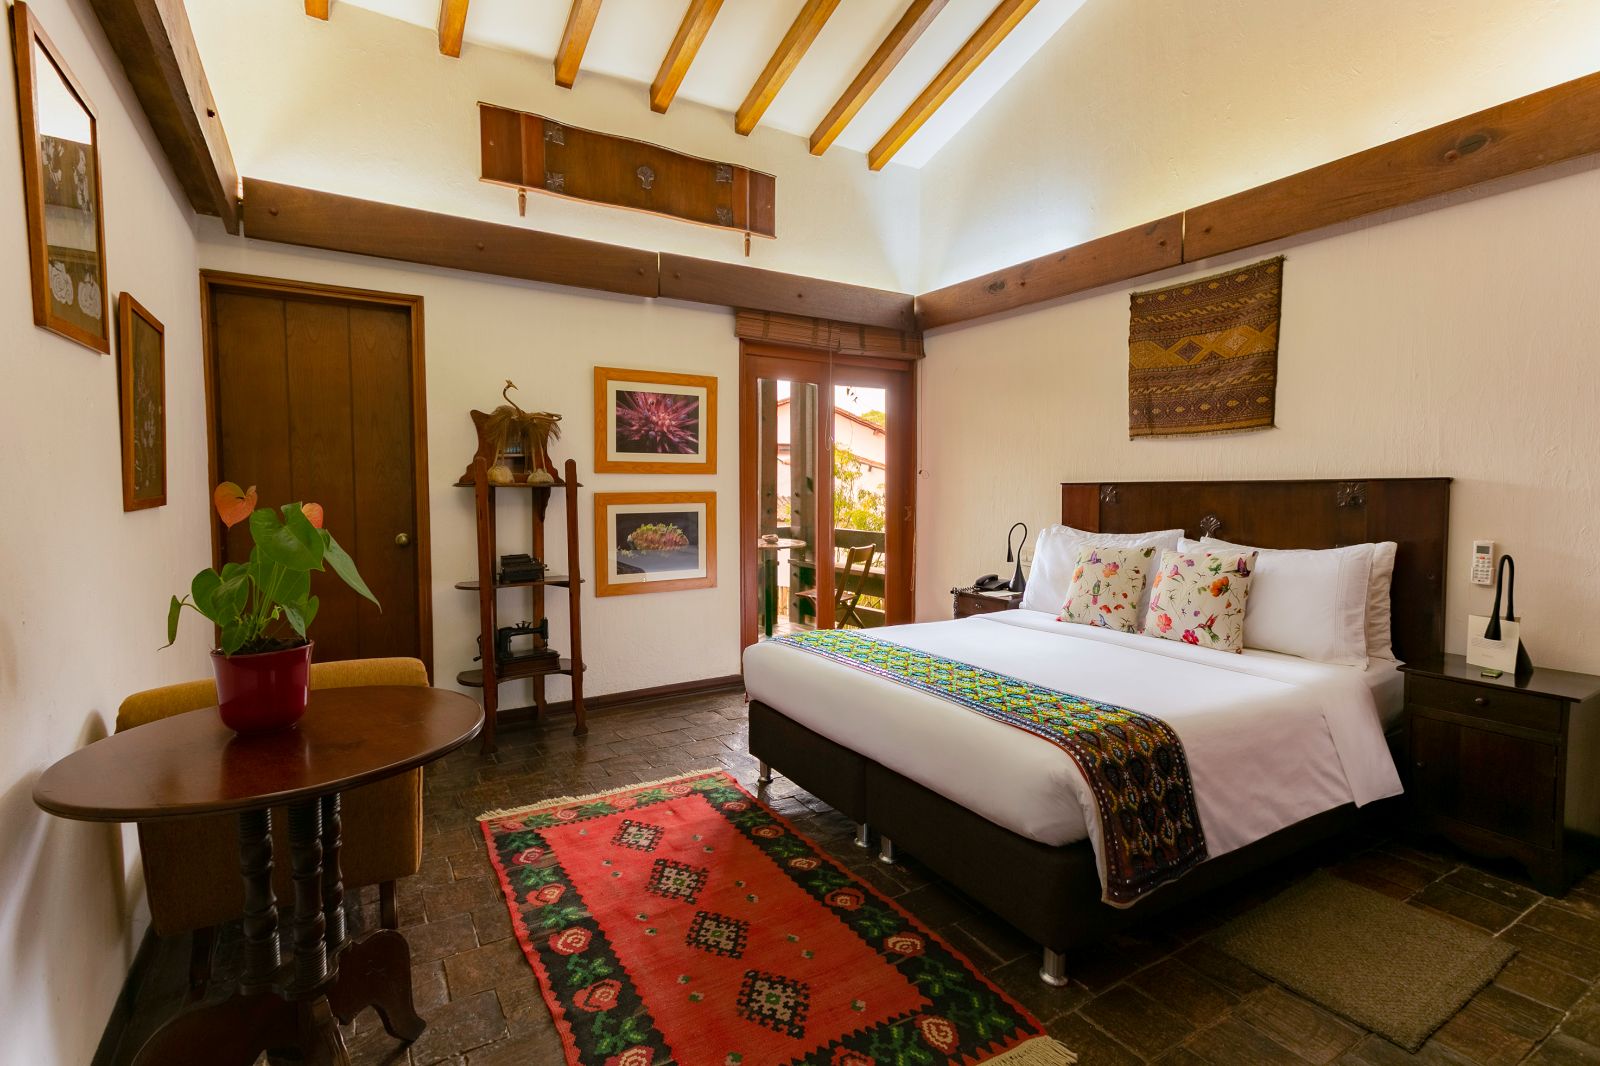 Double bed guest suite at Hotel Boutique Sazagua in Colombia's coffee region